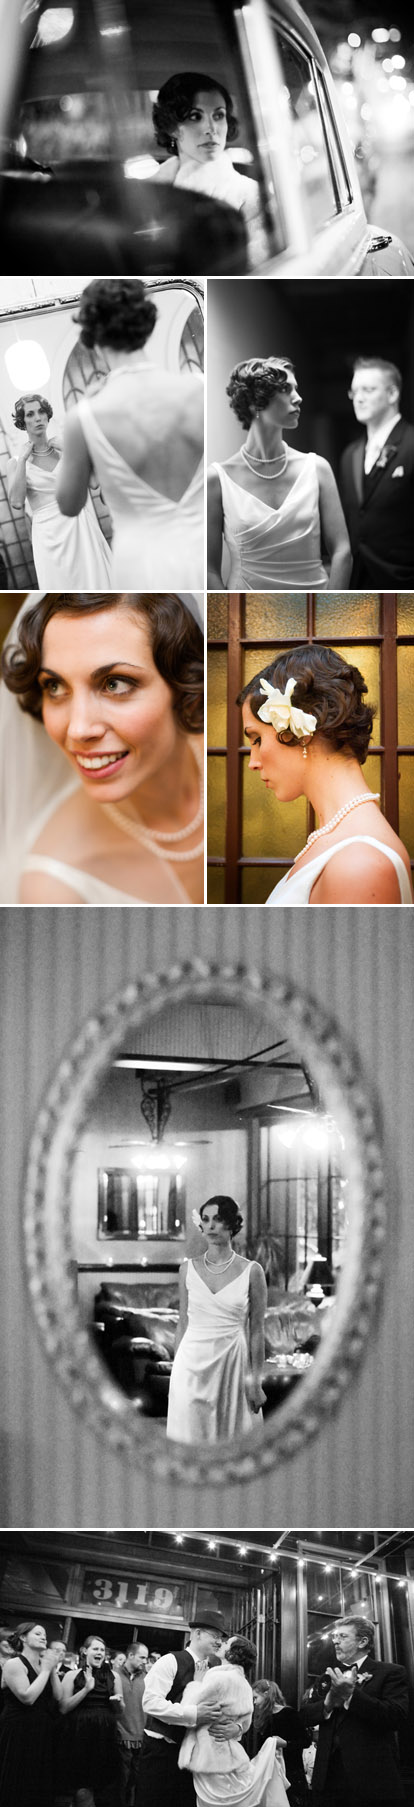 Images by GH Kim Photography, vintage style bridal fashion, hair and accessories